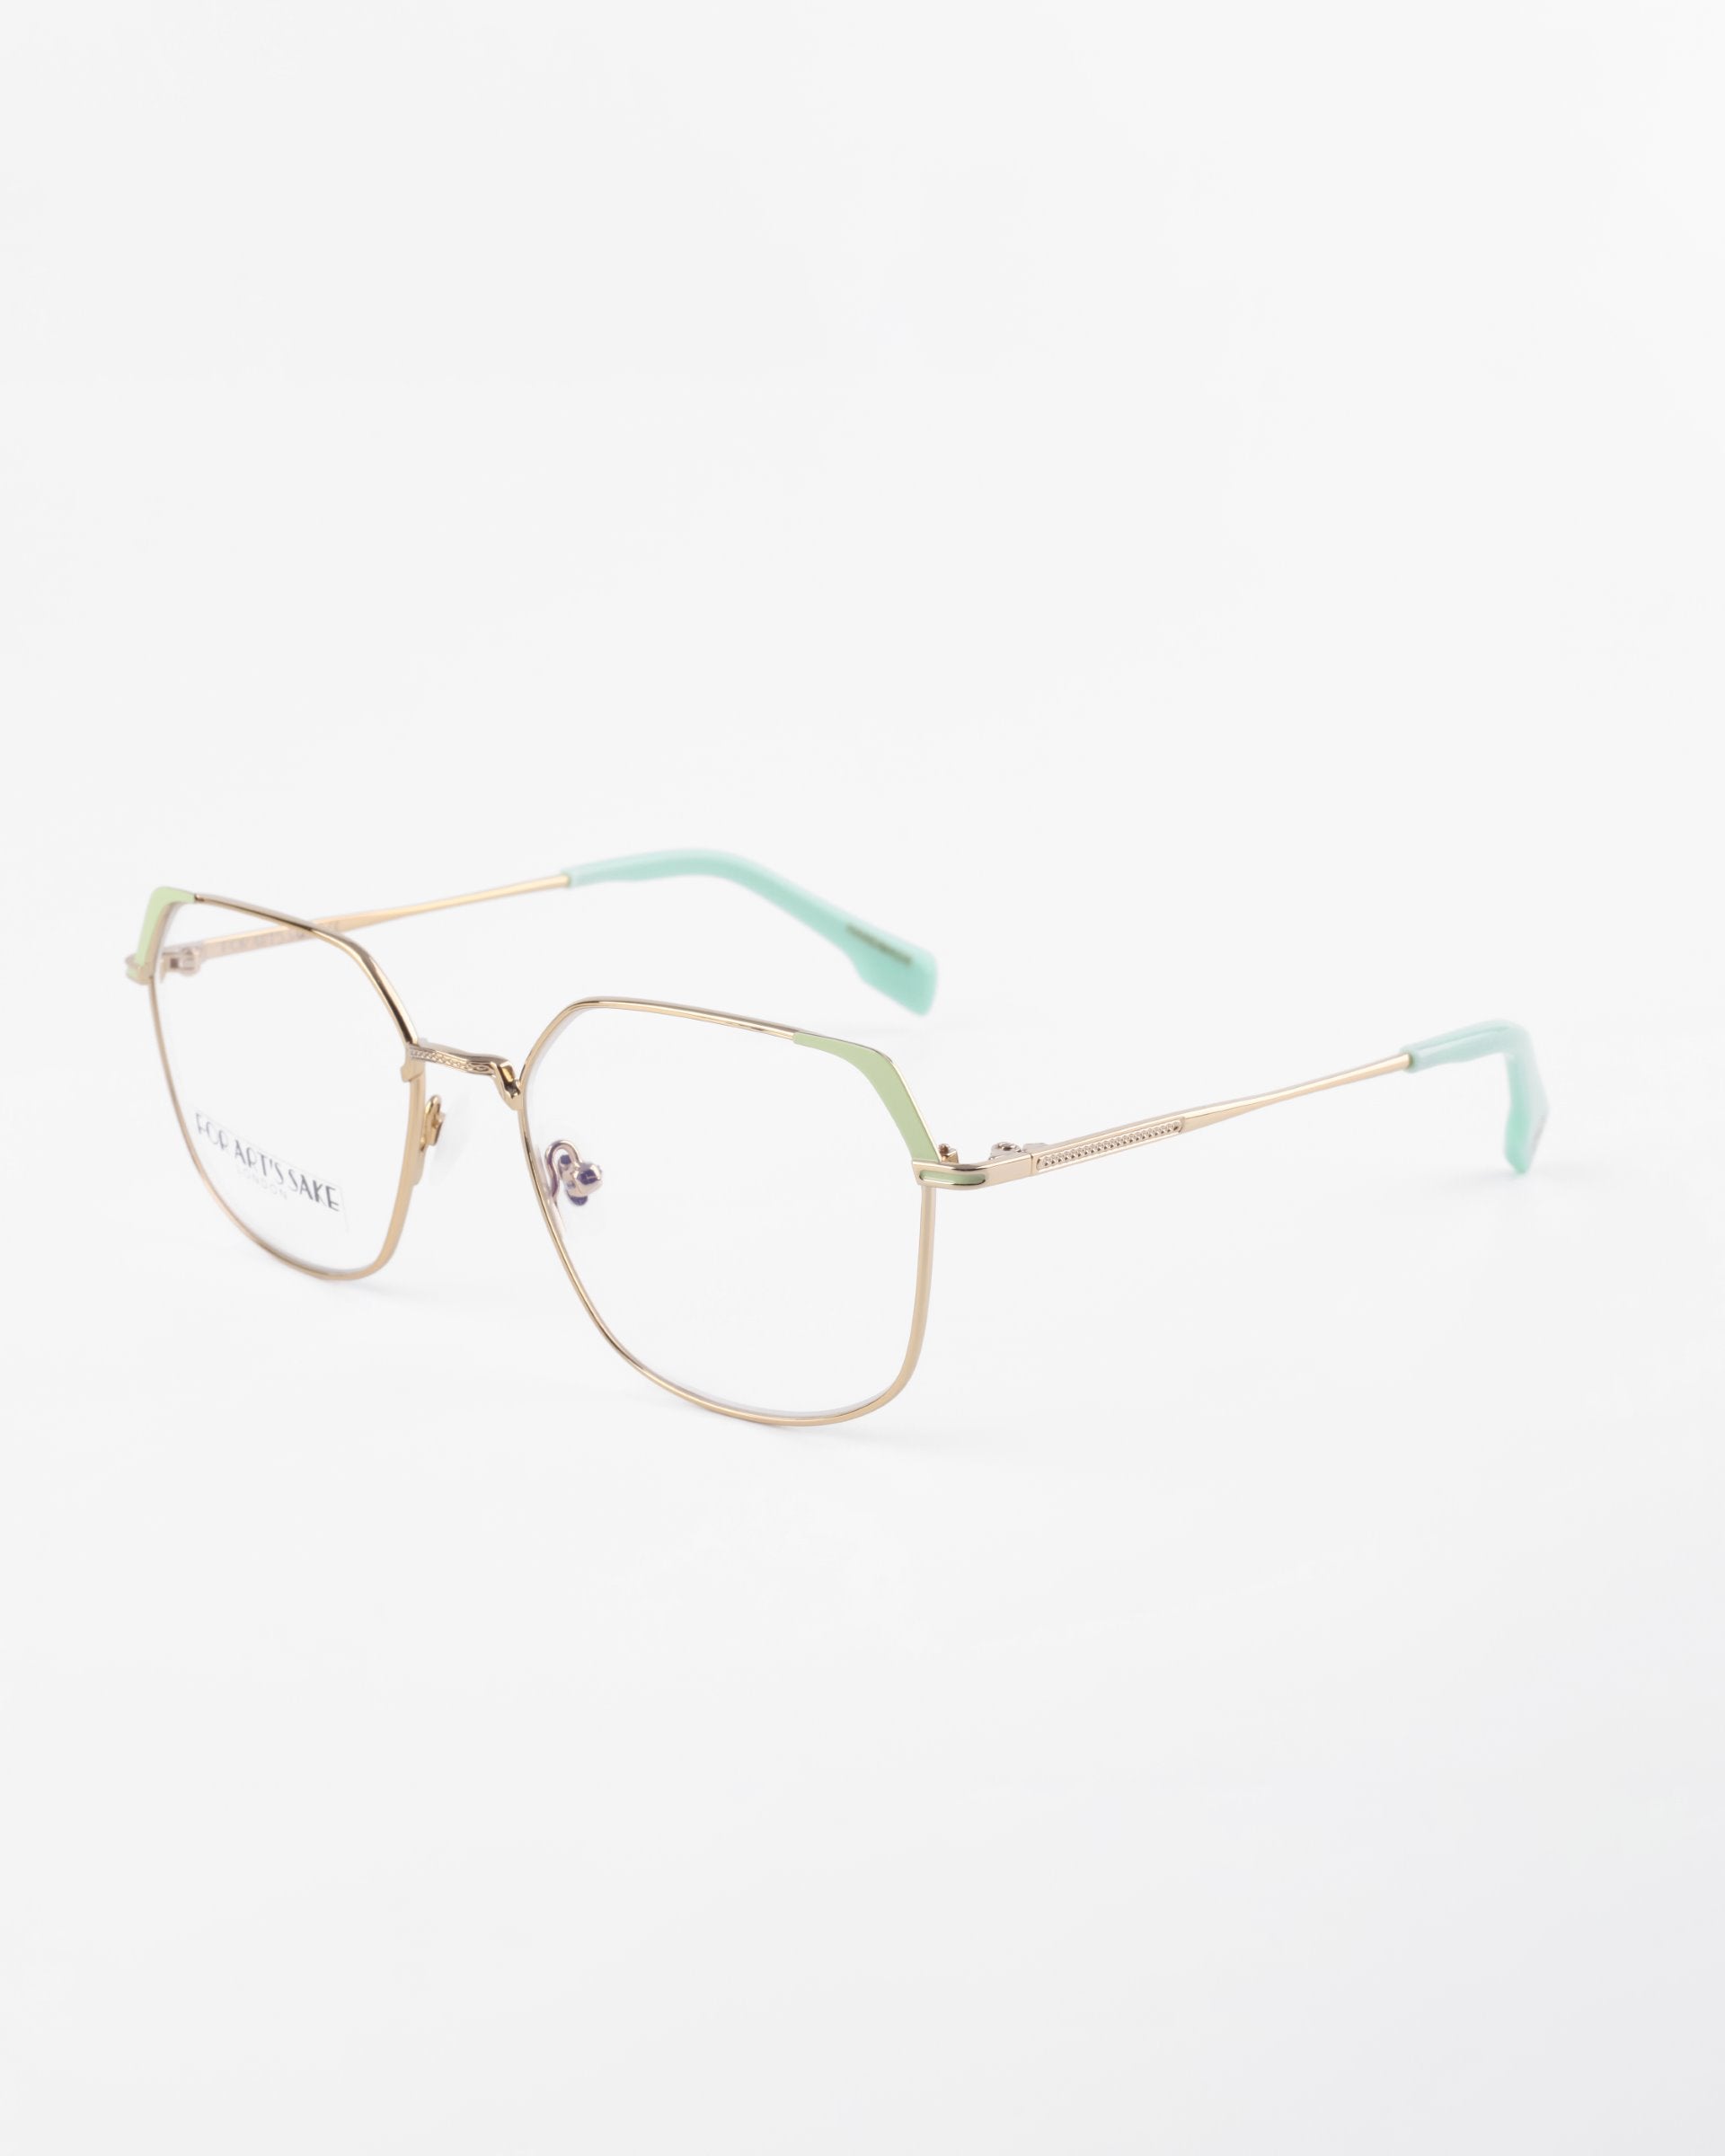 A pair of eyeglasses with gold wire frames and rectangular lenses, featuring mint green accents on the temples and end tips of the arms. These stylish glasses, named Godiva by For Art's Sake®, also come with optional prescription lenses. Displayed against a white background, they elegantly blend fashion with functionality.